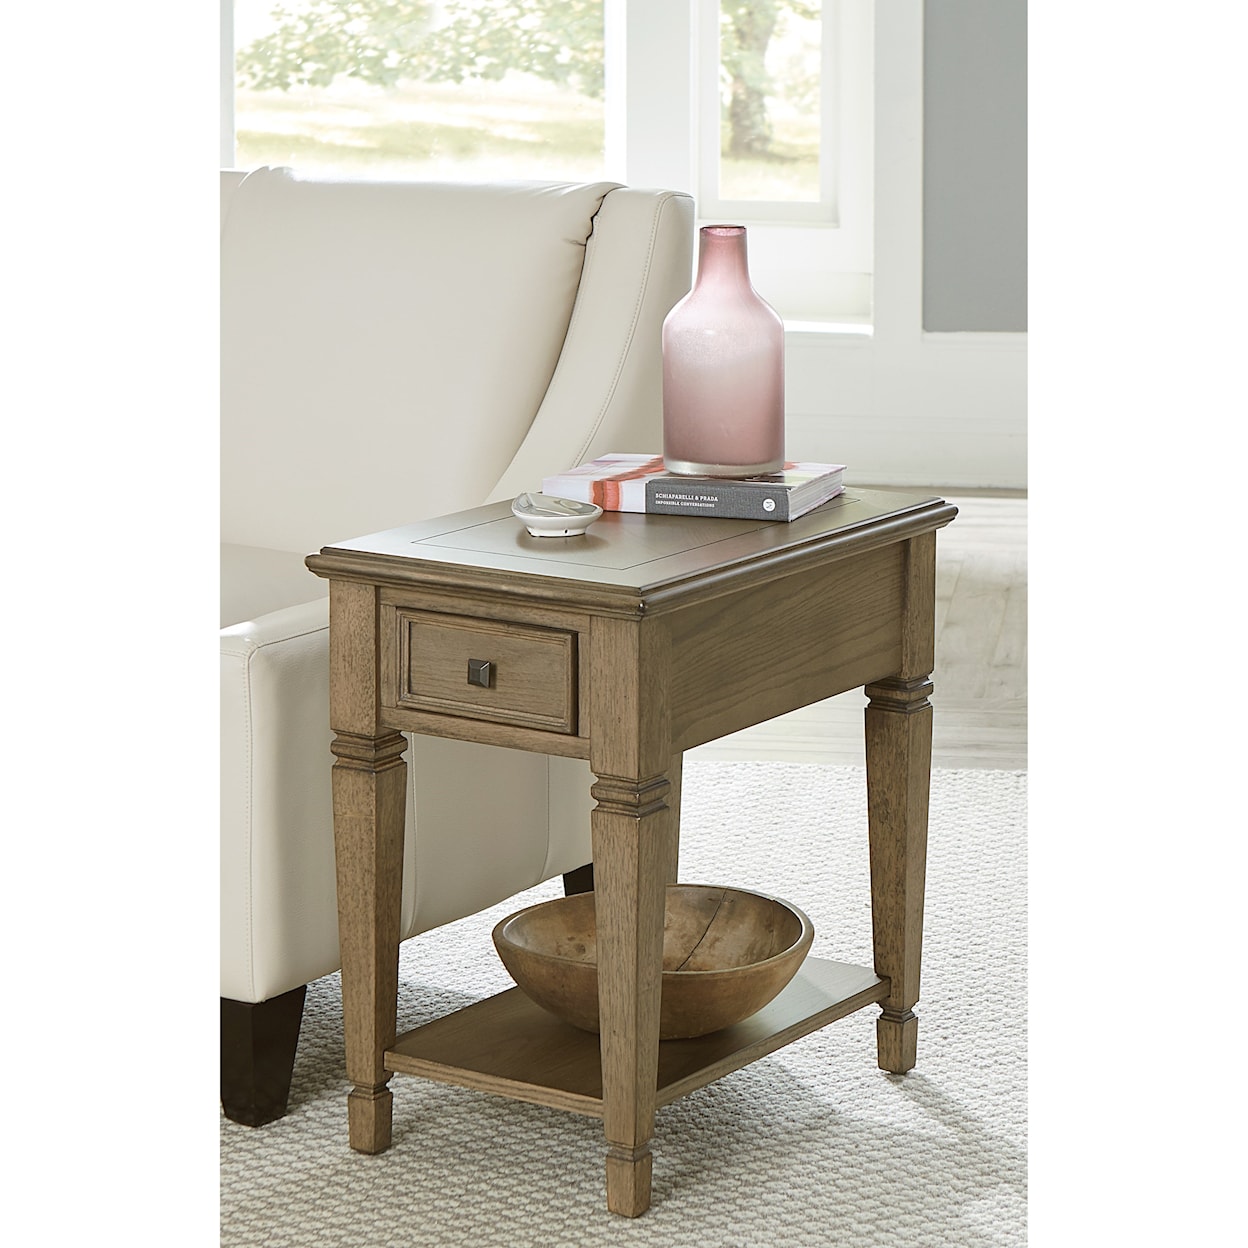 Dimensions Proximity Chairside Table